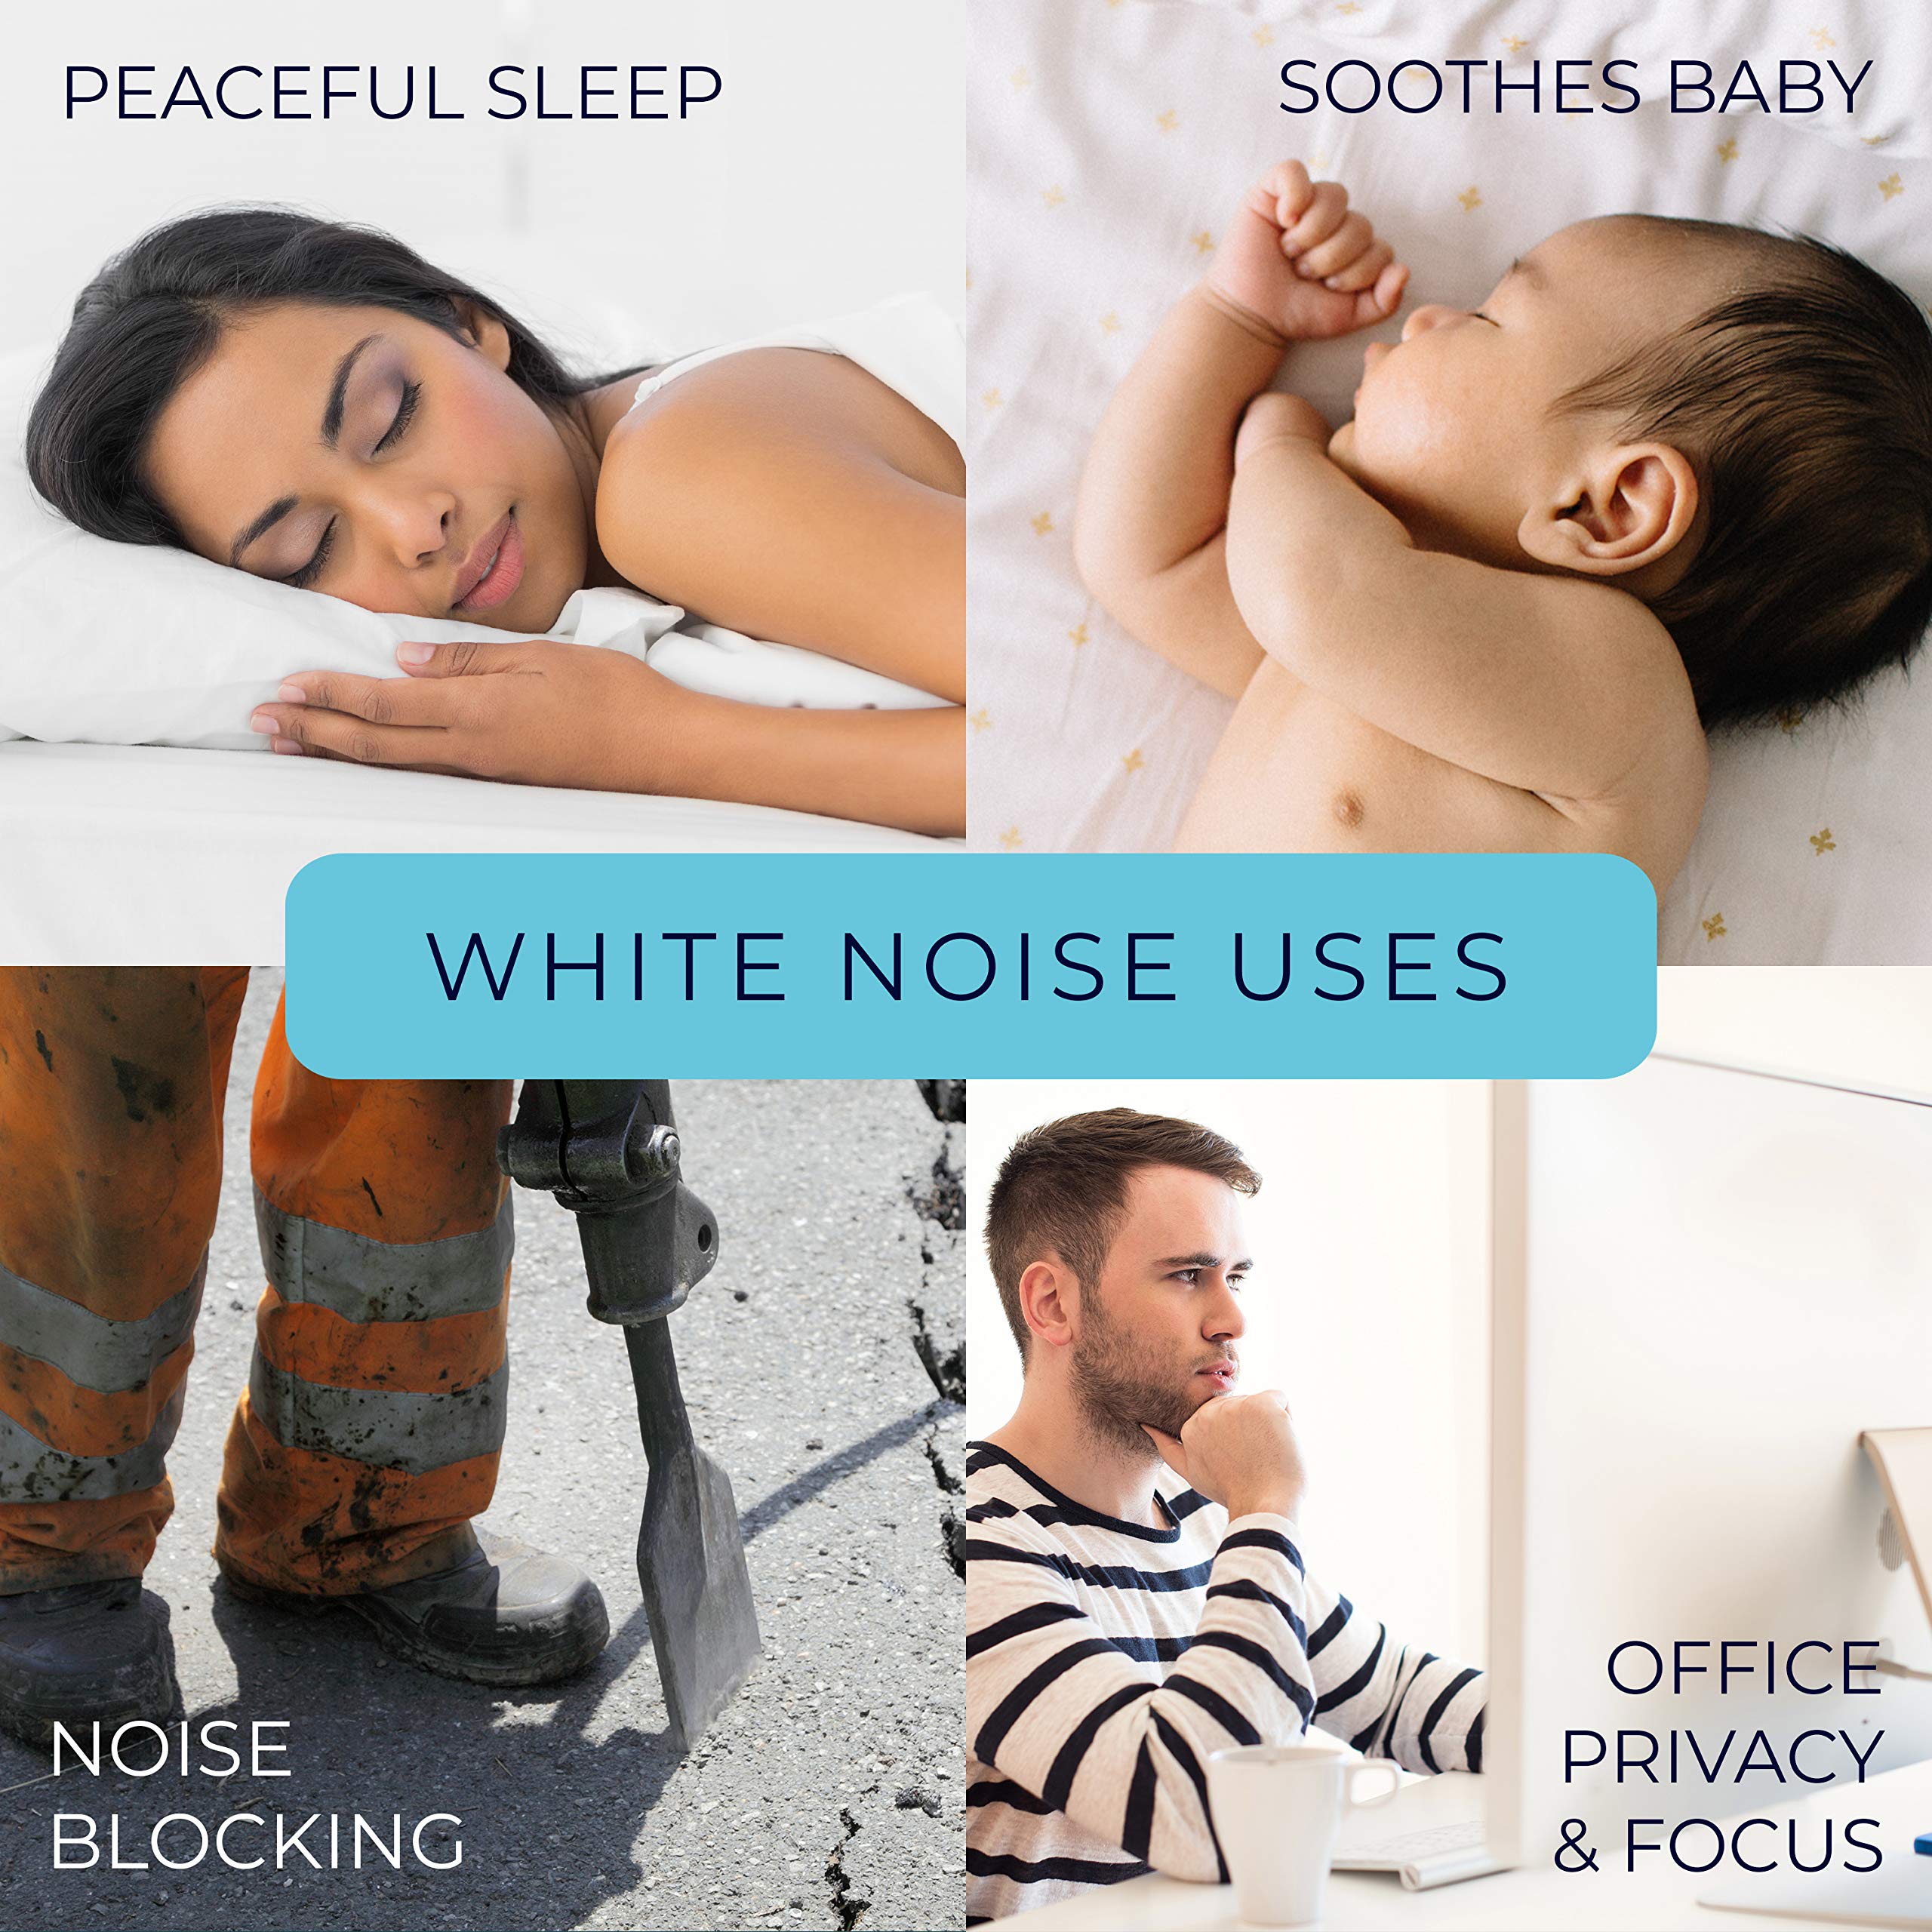 Yogasleep Dohm Classic The Original White Noise Machine | Soothing Natural Sound from a Real Fan | Noise Cancelling | Sleep Therapy, Office Privacy, Travel | For Adults, Baby | 101 Night Trial